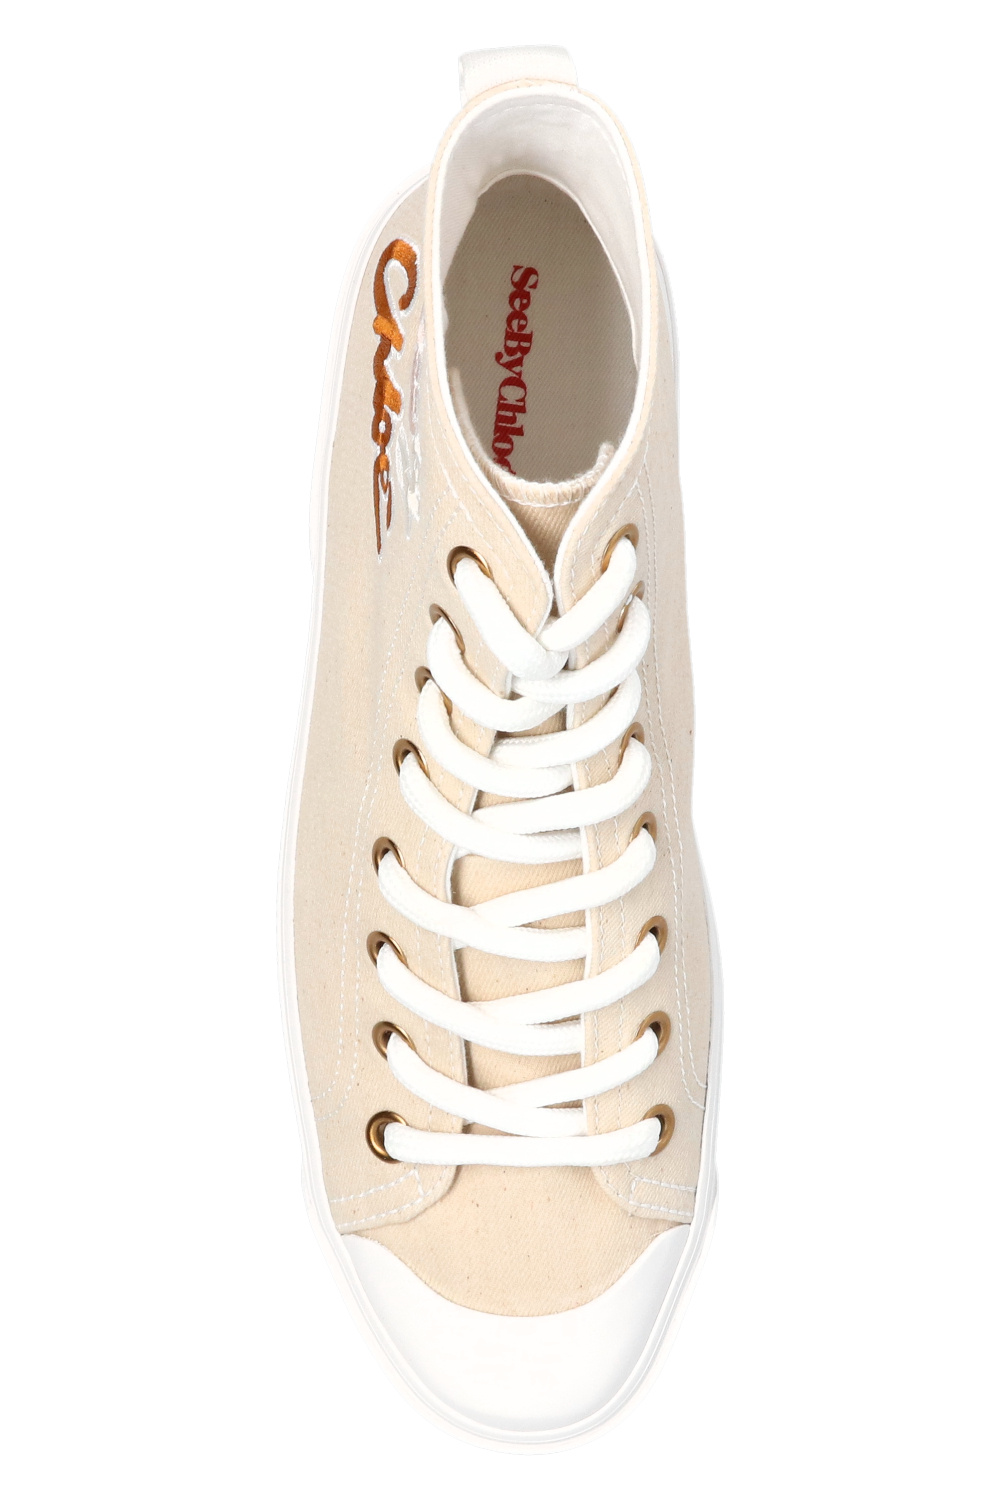 See By Chloe 'Aryana' lace-up sneakers